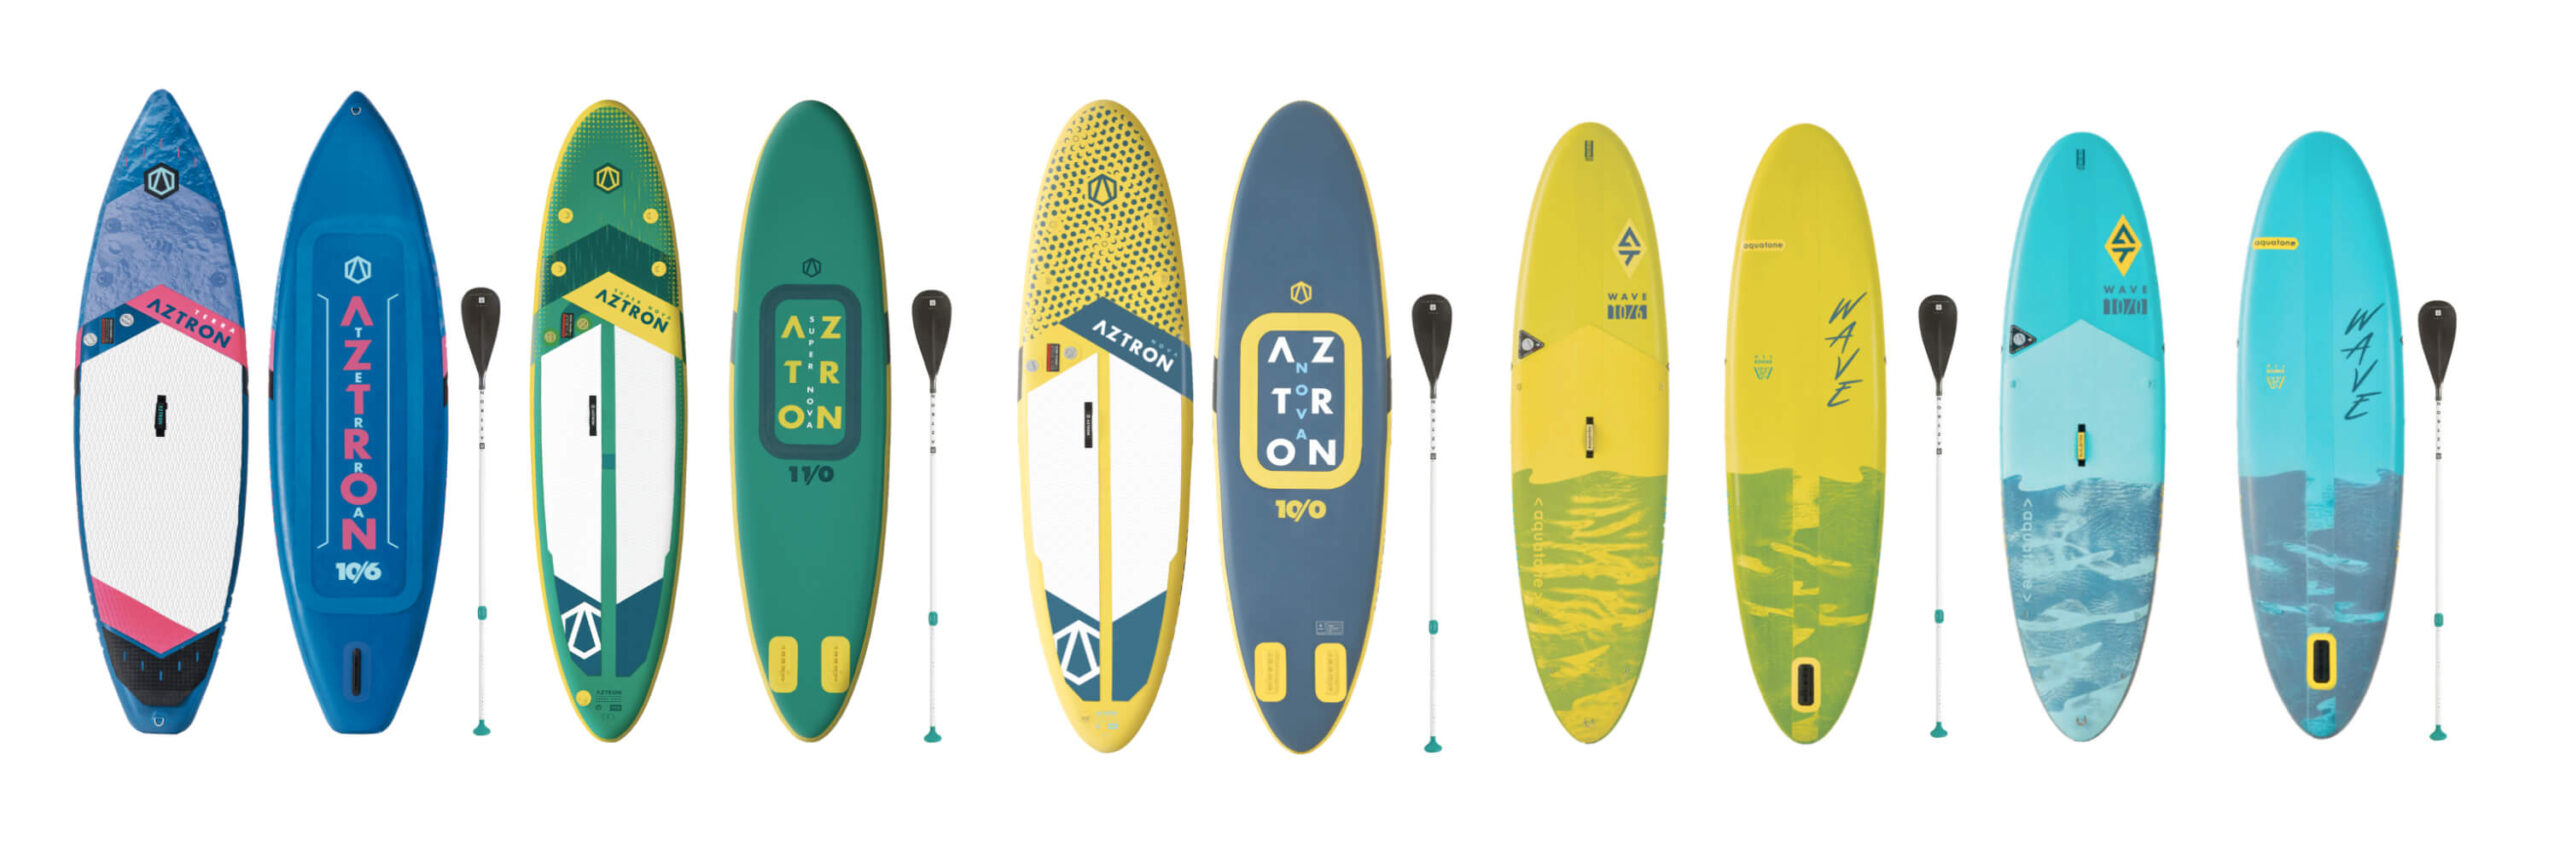 SUP STATION SUP BOARDS